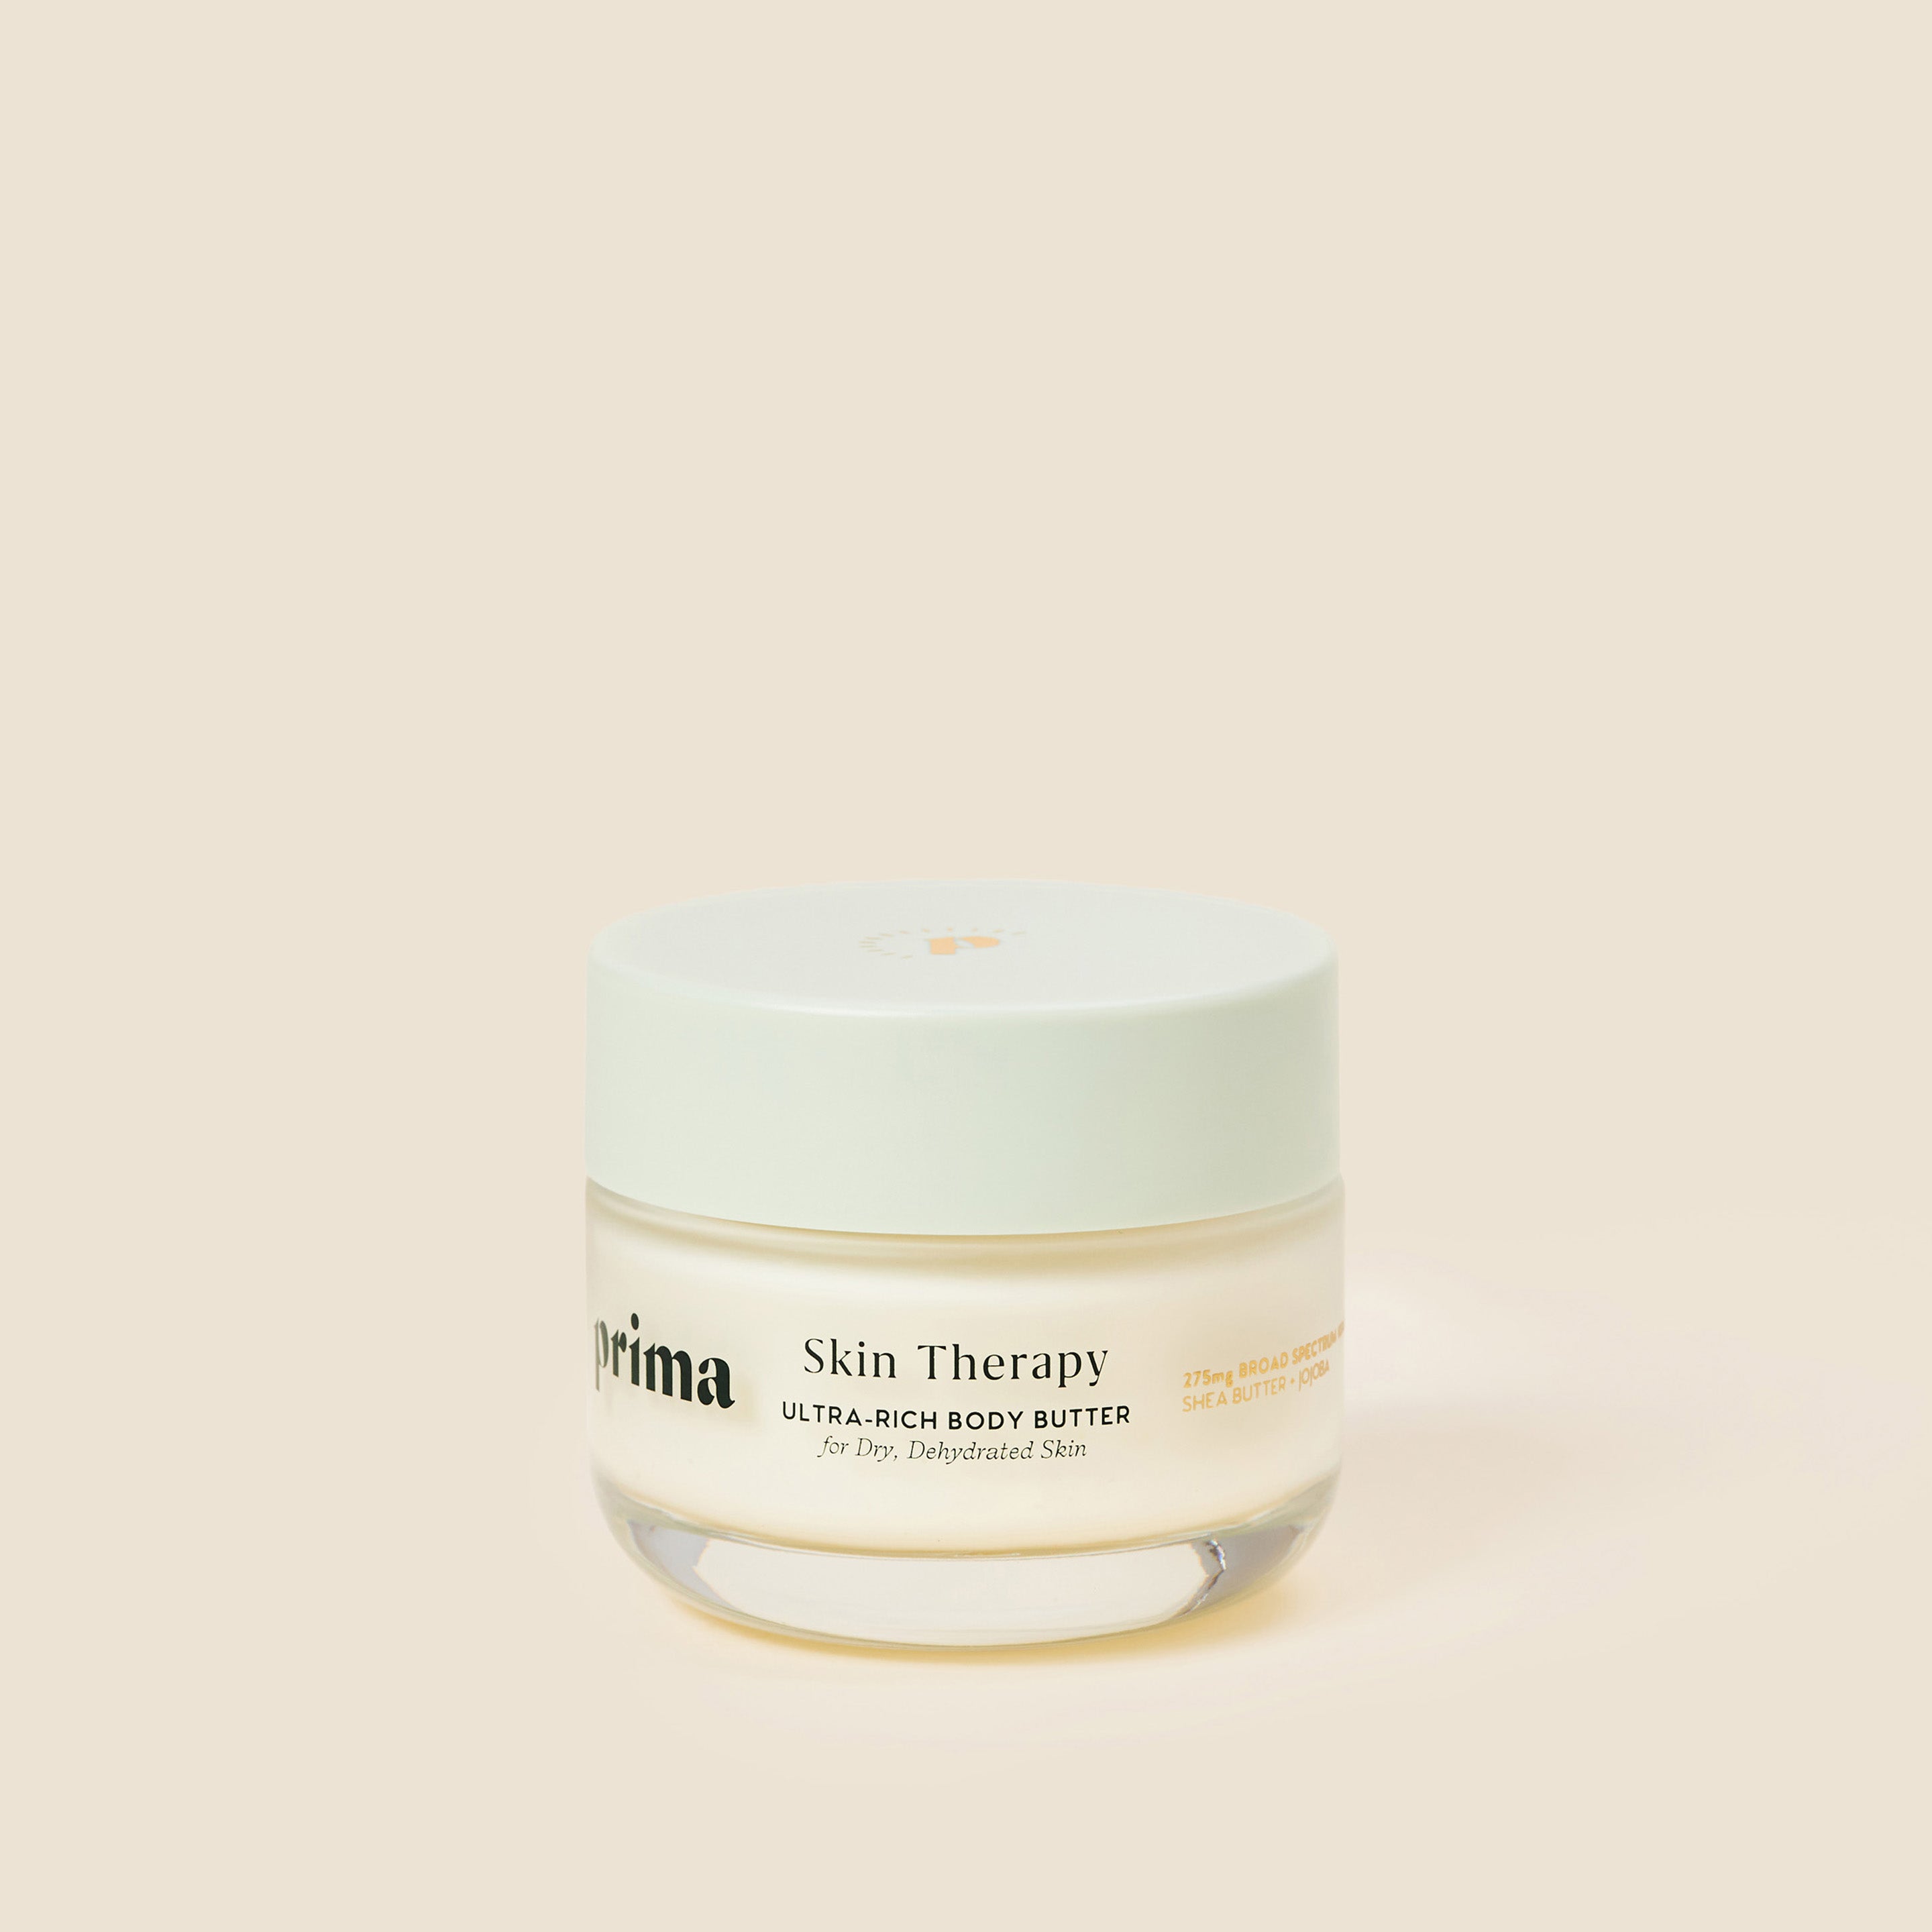 Image of Skin Therapy | Ultra-Rich Body Butter for Dry, Dehydrated Skin